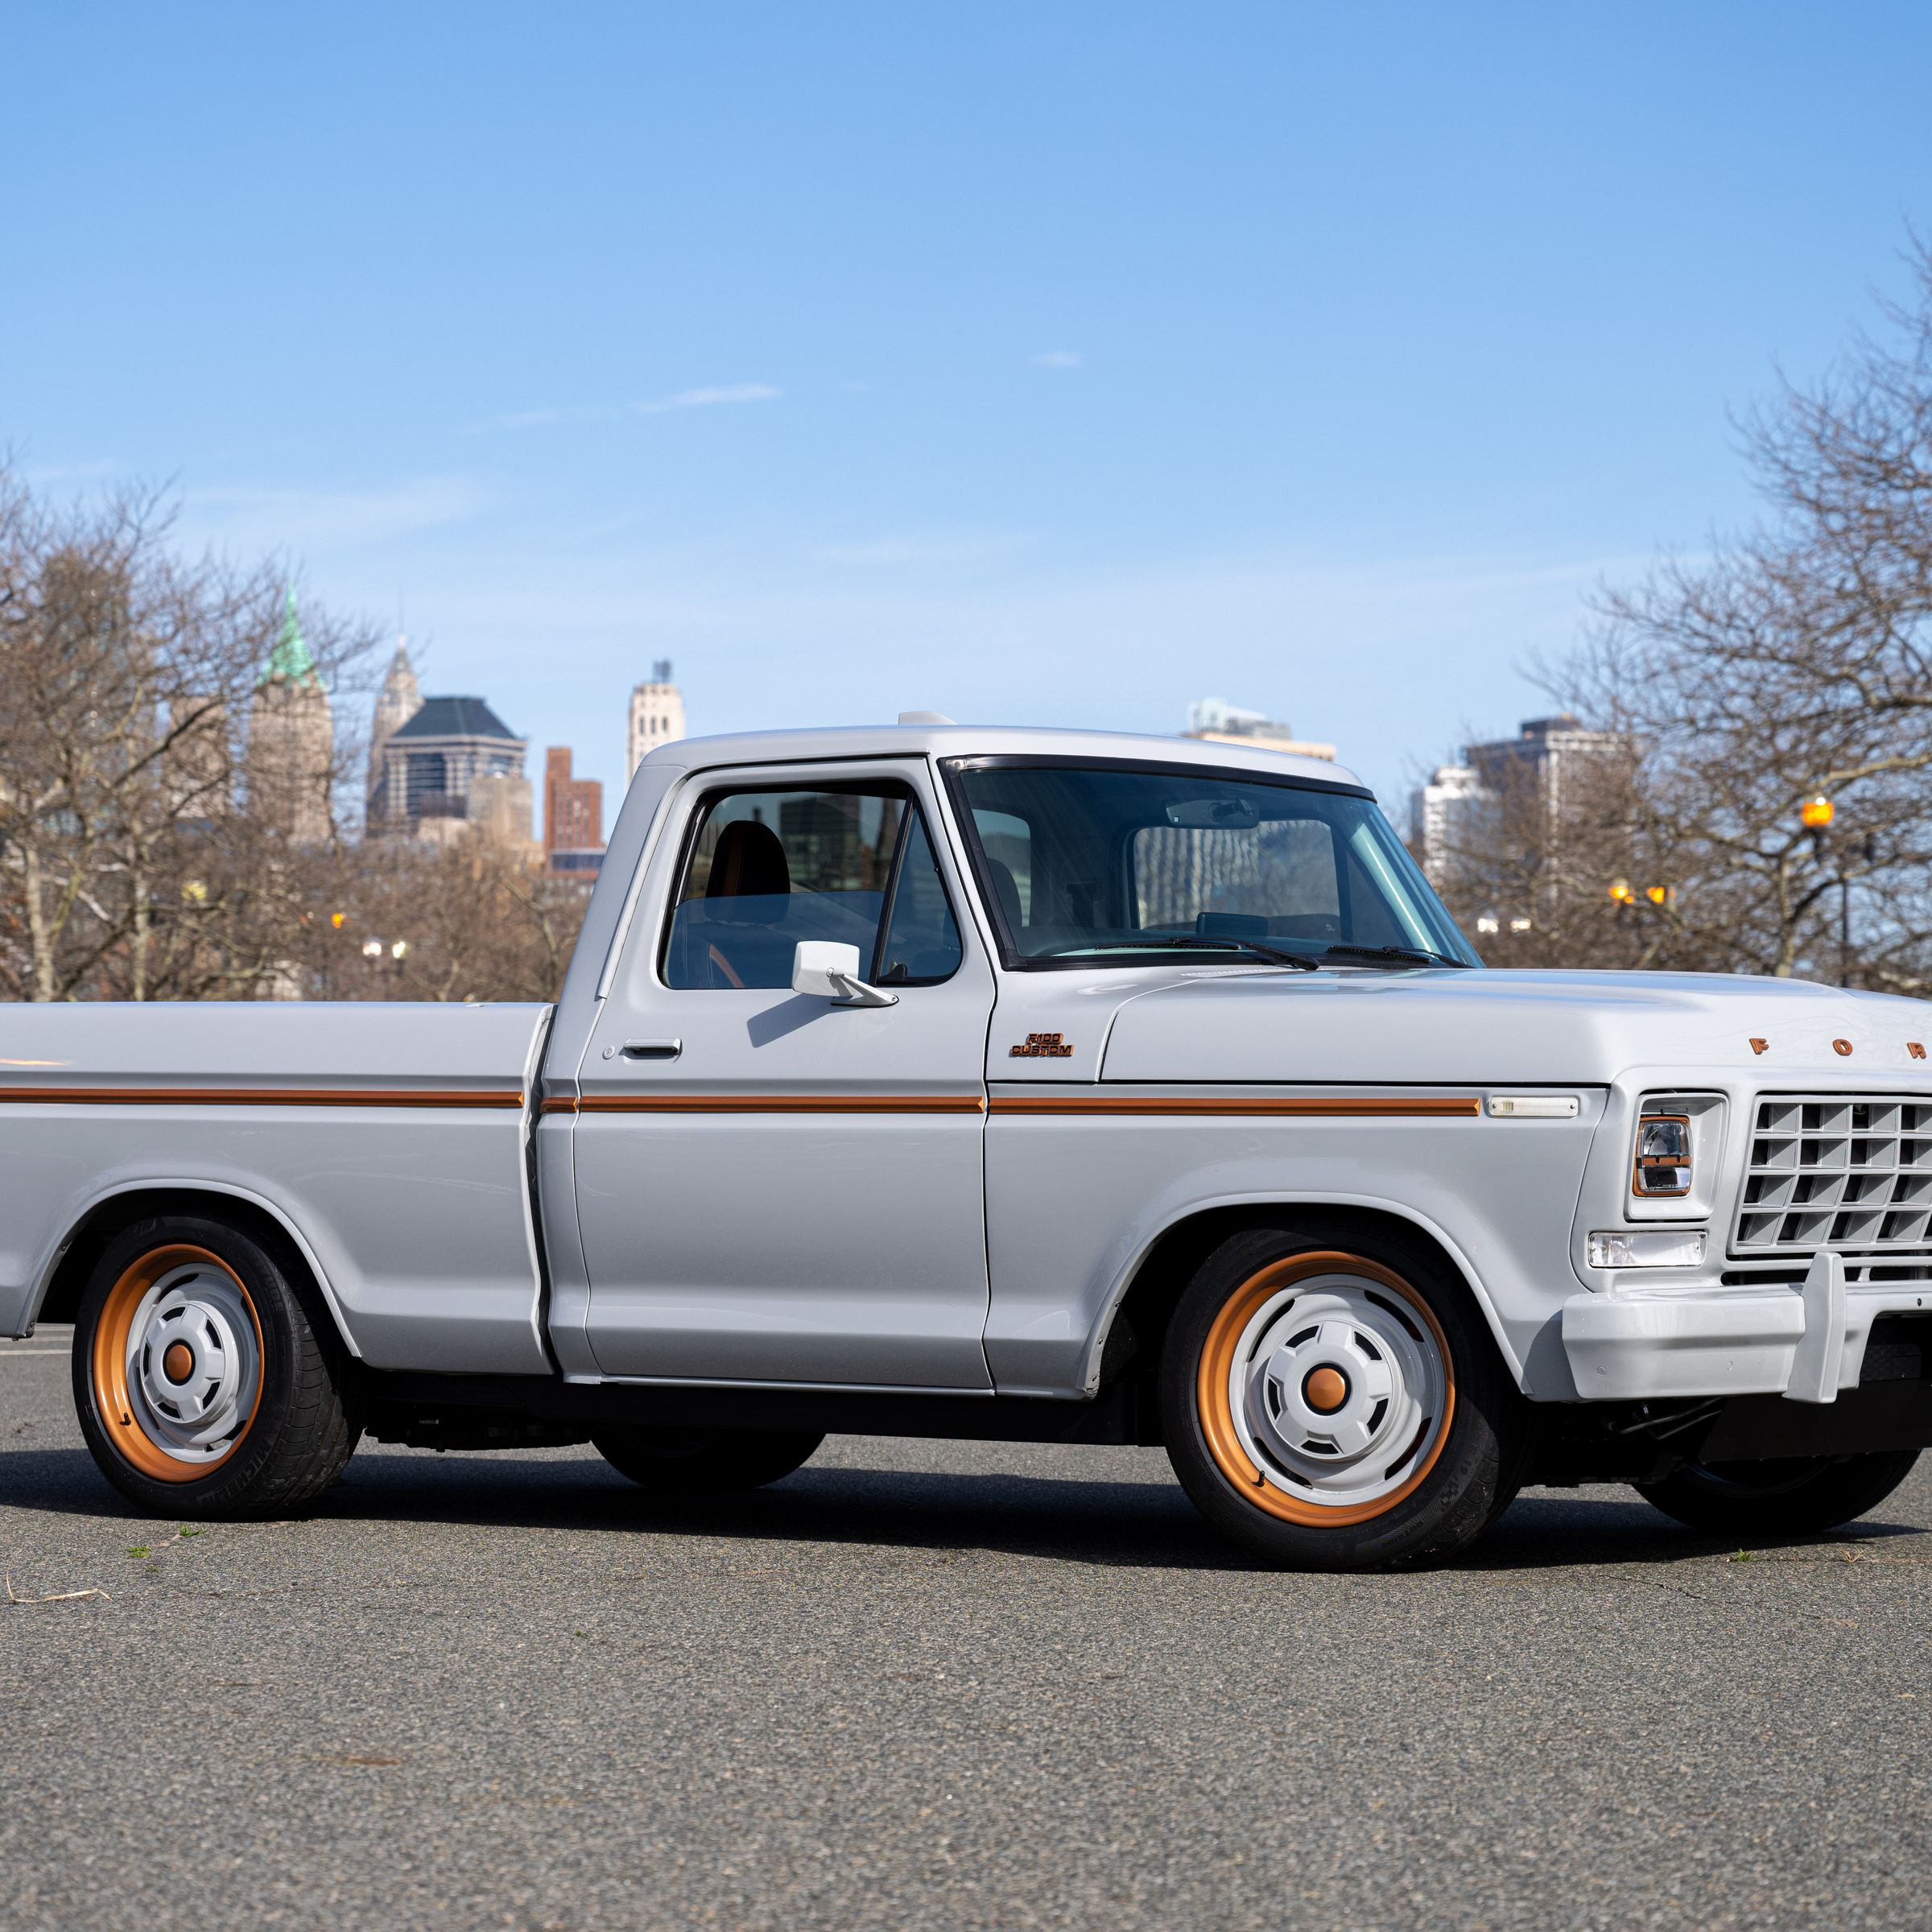 The F-100 Eluminator is a “Restomod”, meaning it is restored and modified.